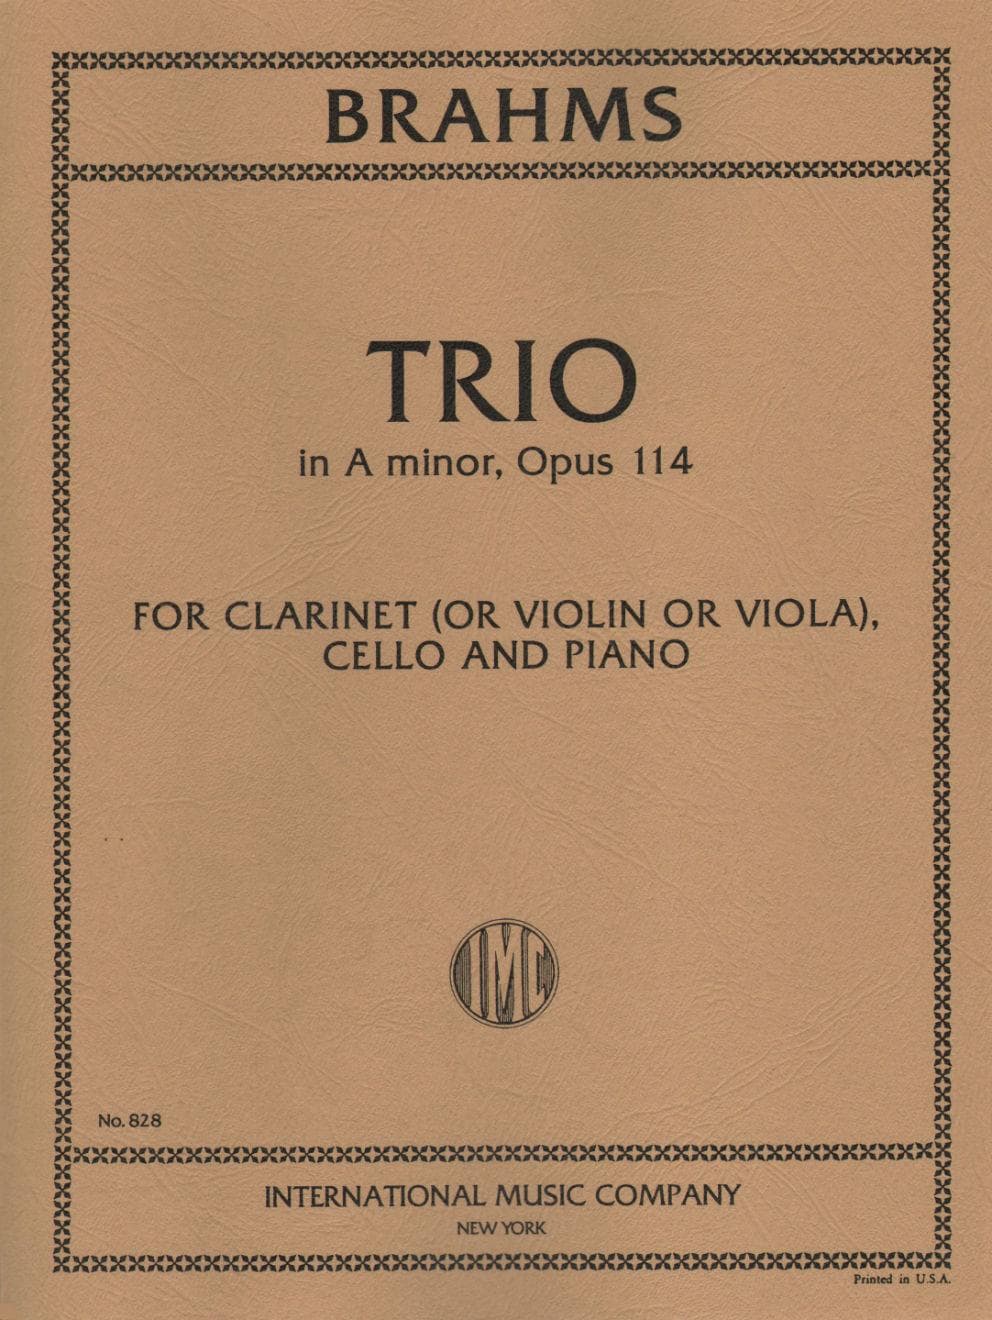 Brahms, Johannes - Clarinet Trio in a minor Op 114 for Violin, Cello and Piano - International Edition